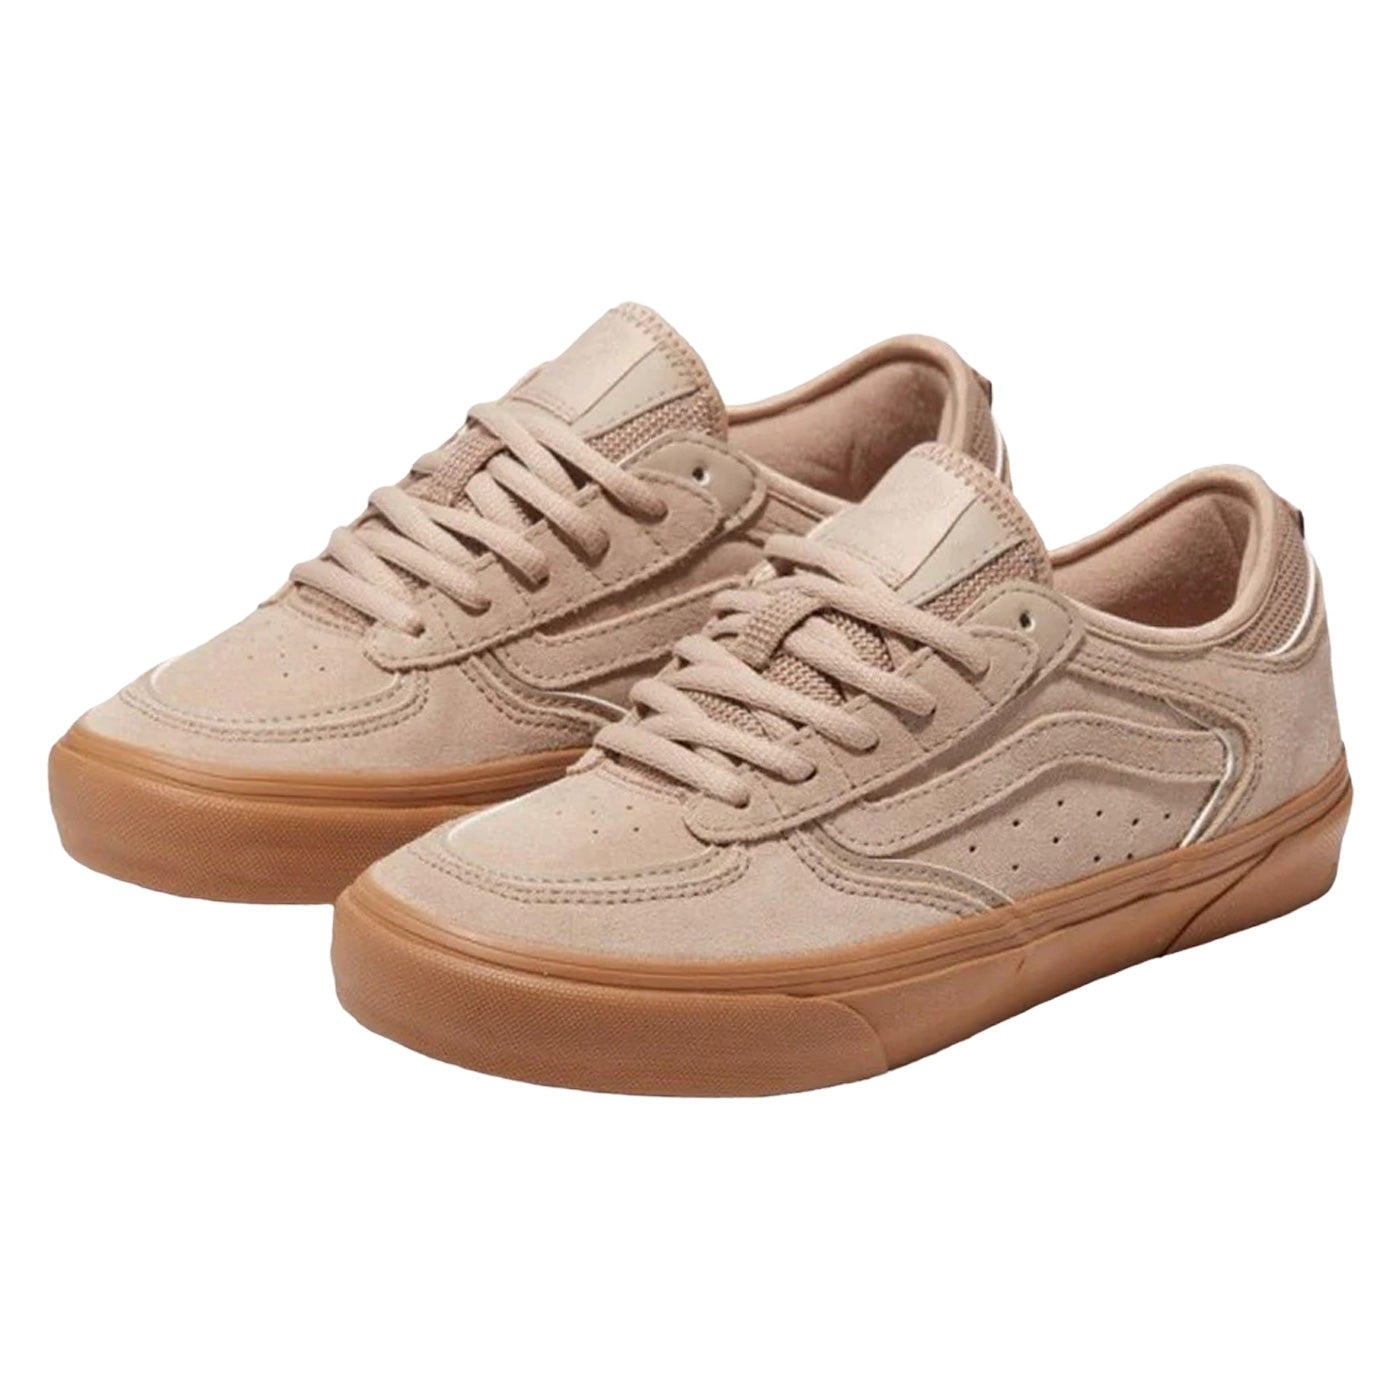 Tan coloured Rowley Vans low top laced skate shoes with gum sole. Free uk shipping over £50